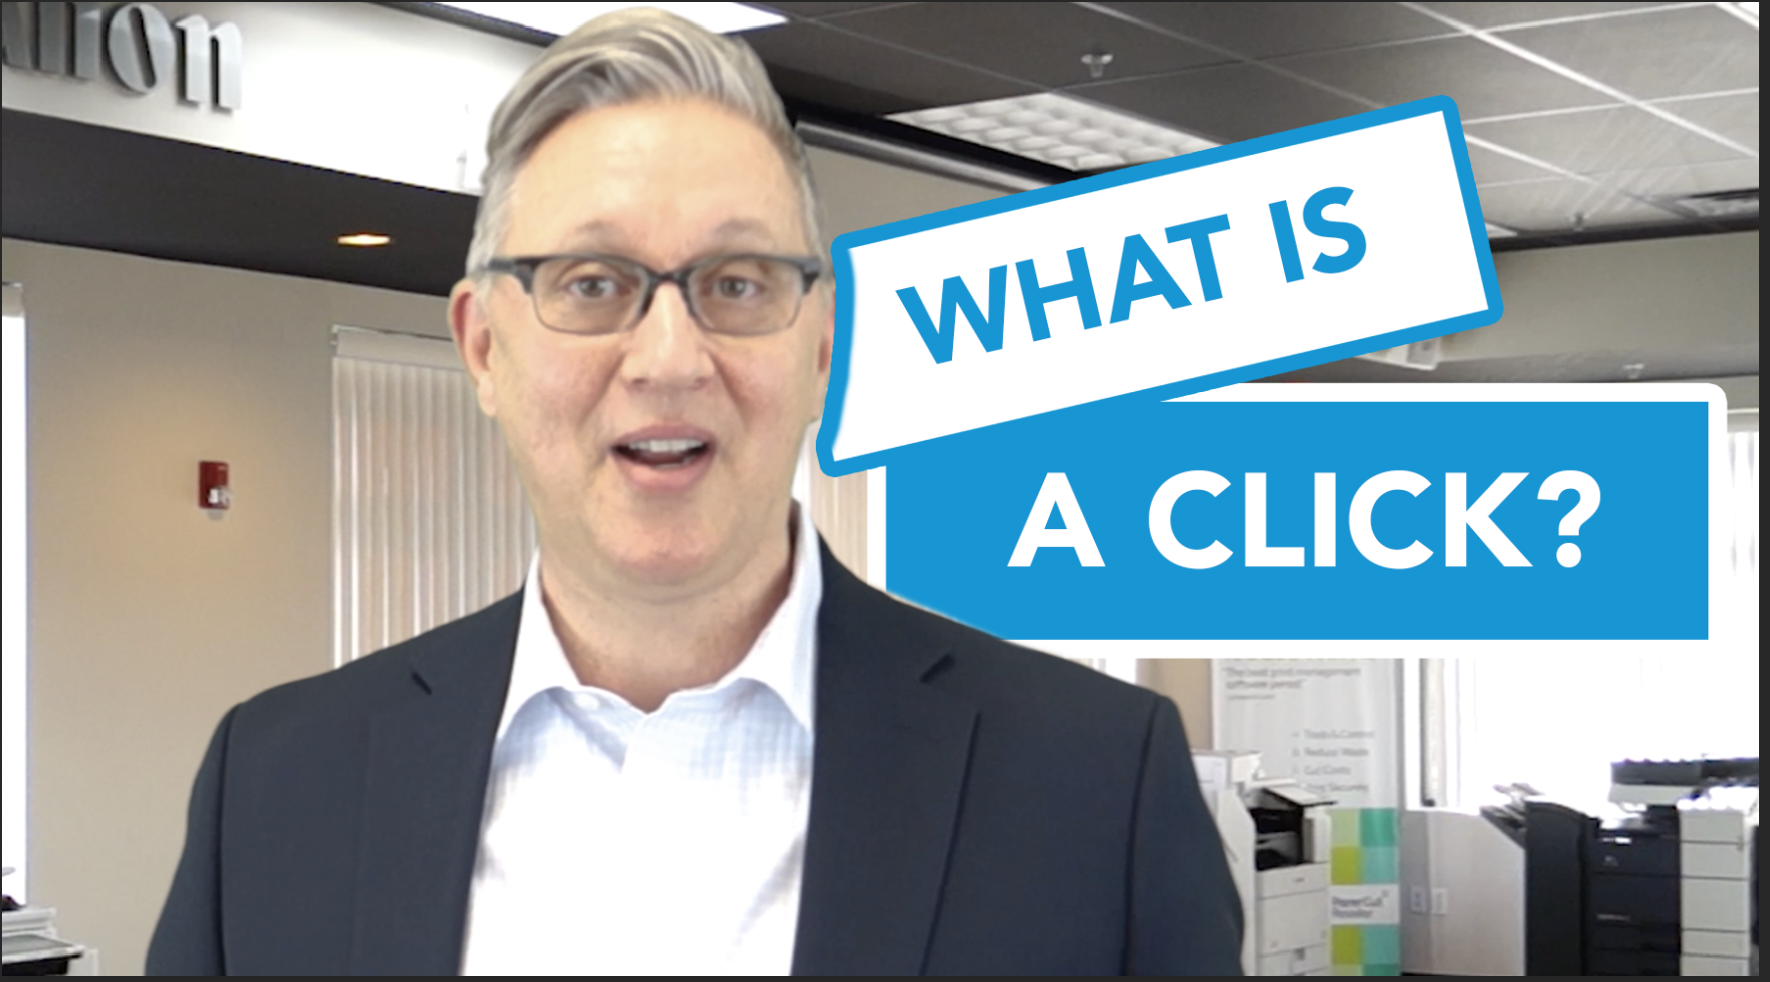 What is a click?